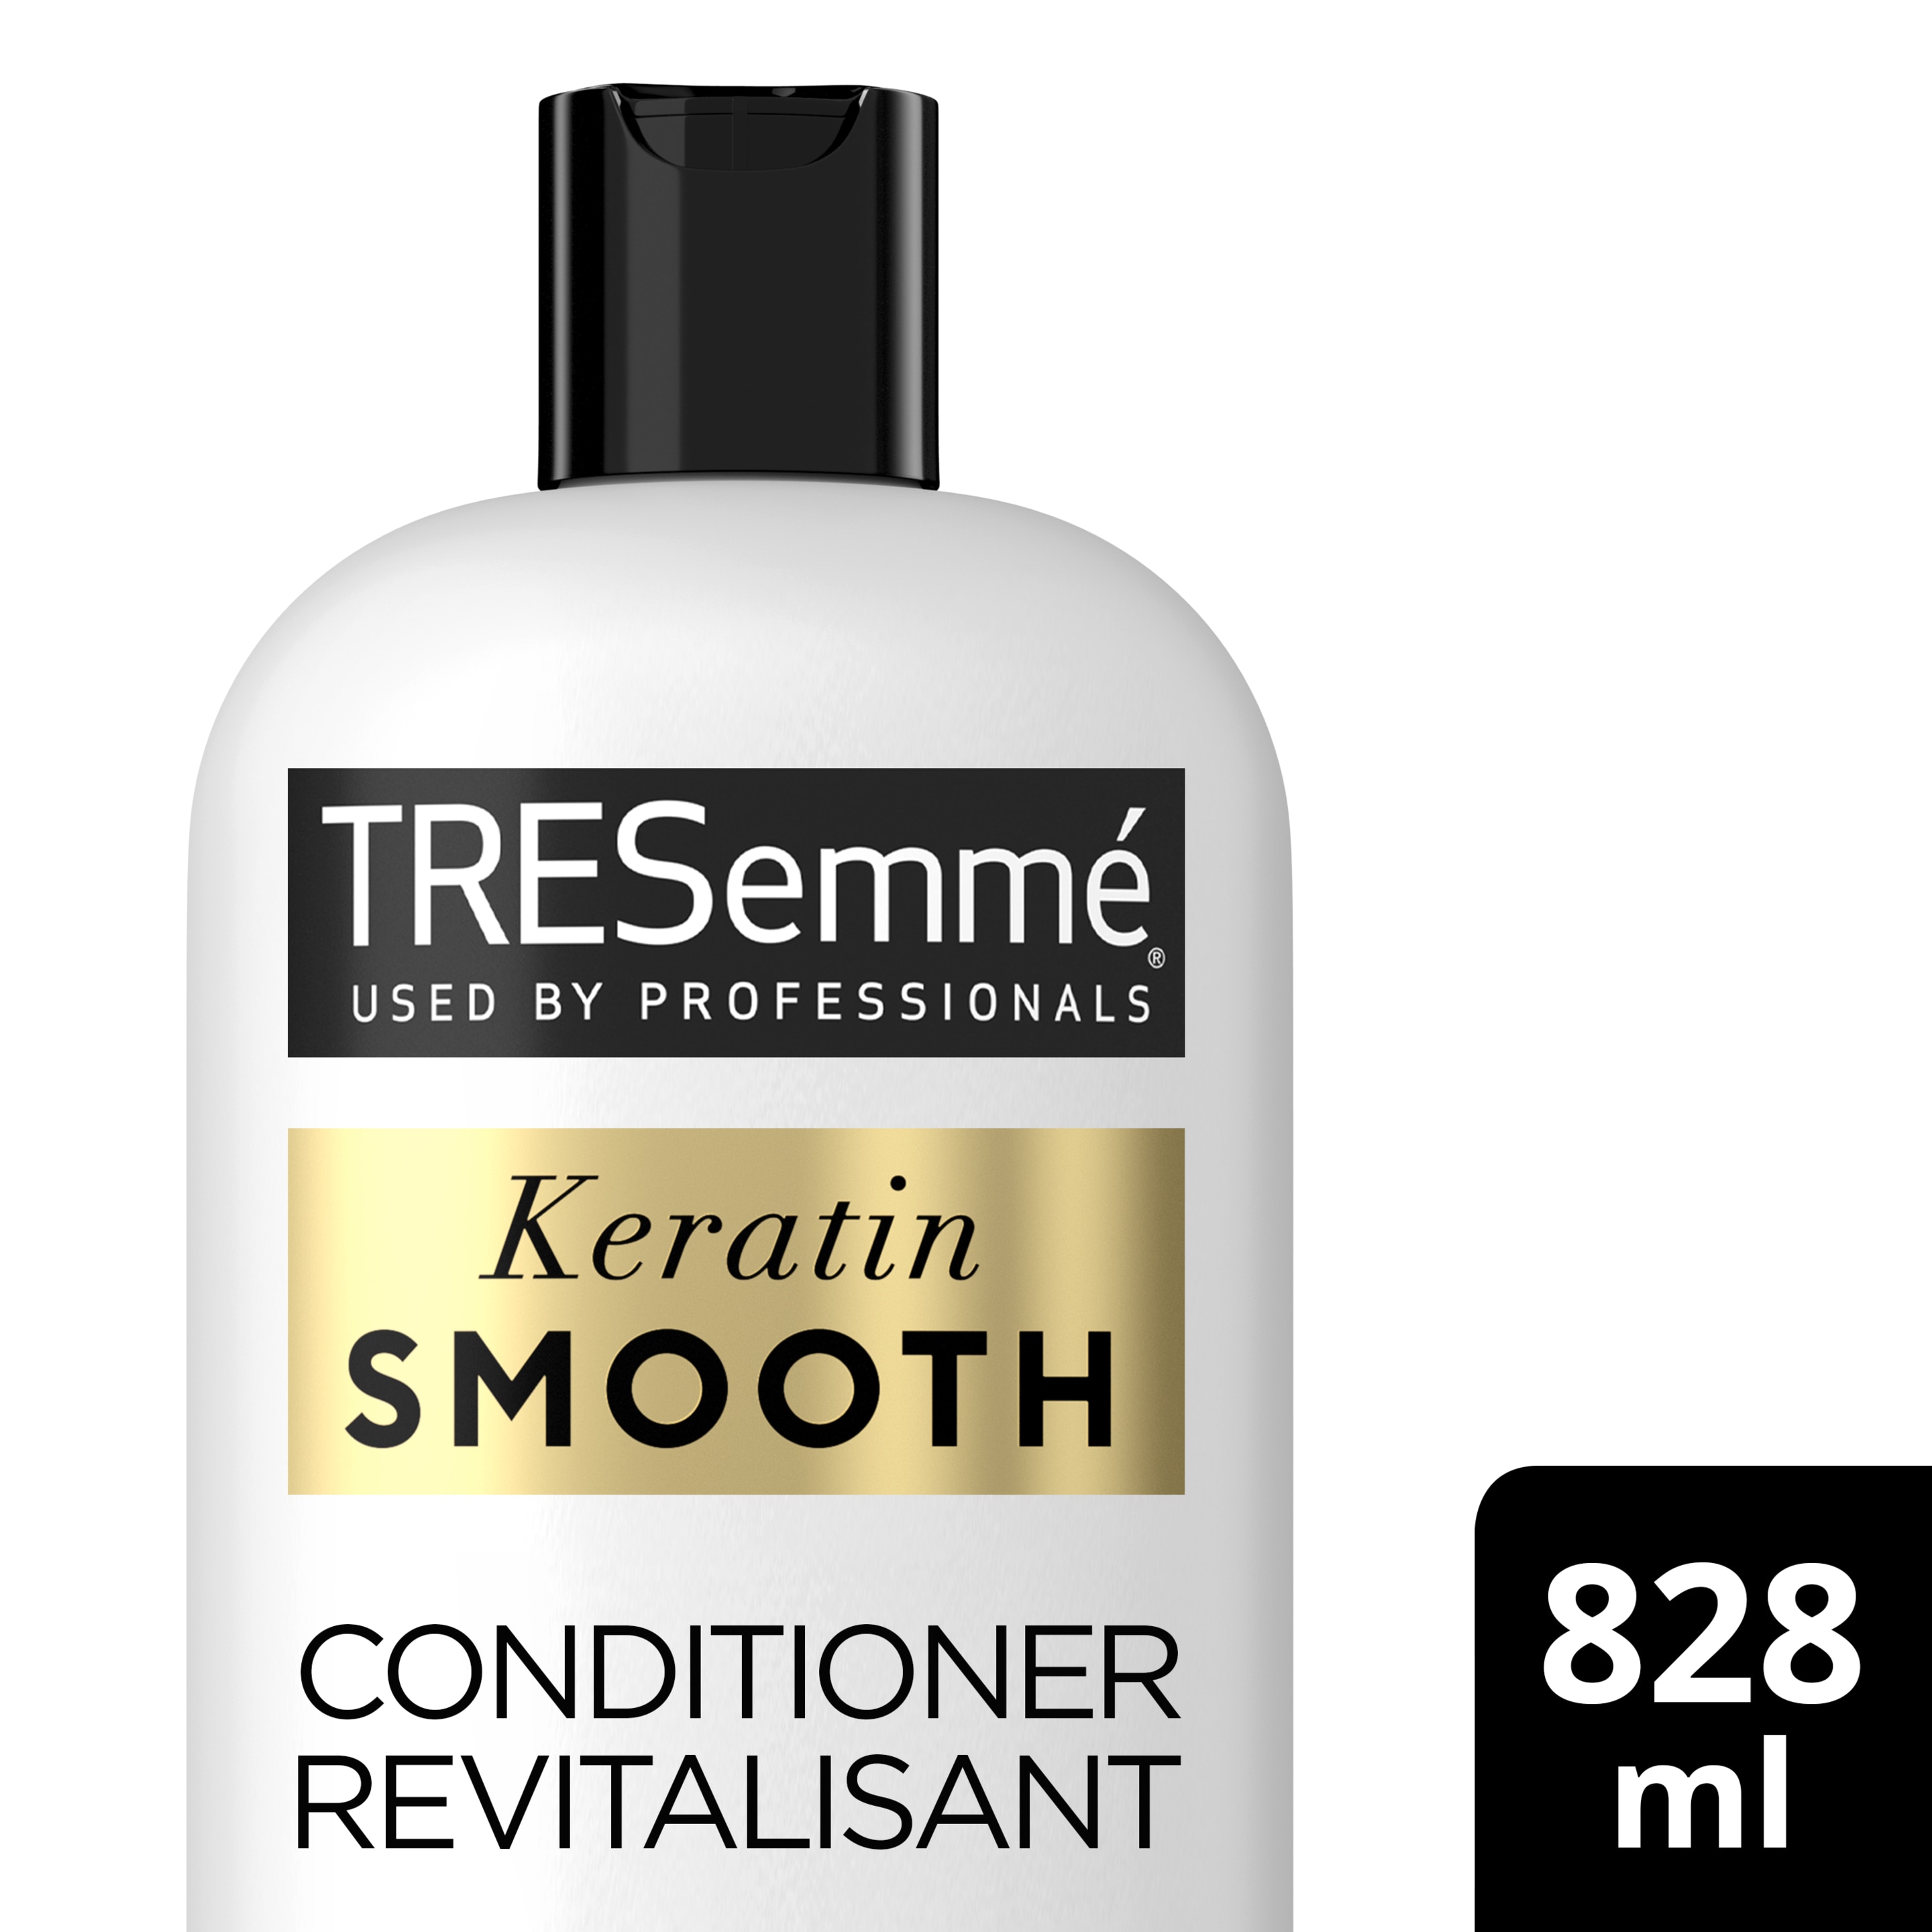 Keratin Smooth Conditioner for Frizzy Hair